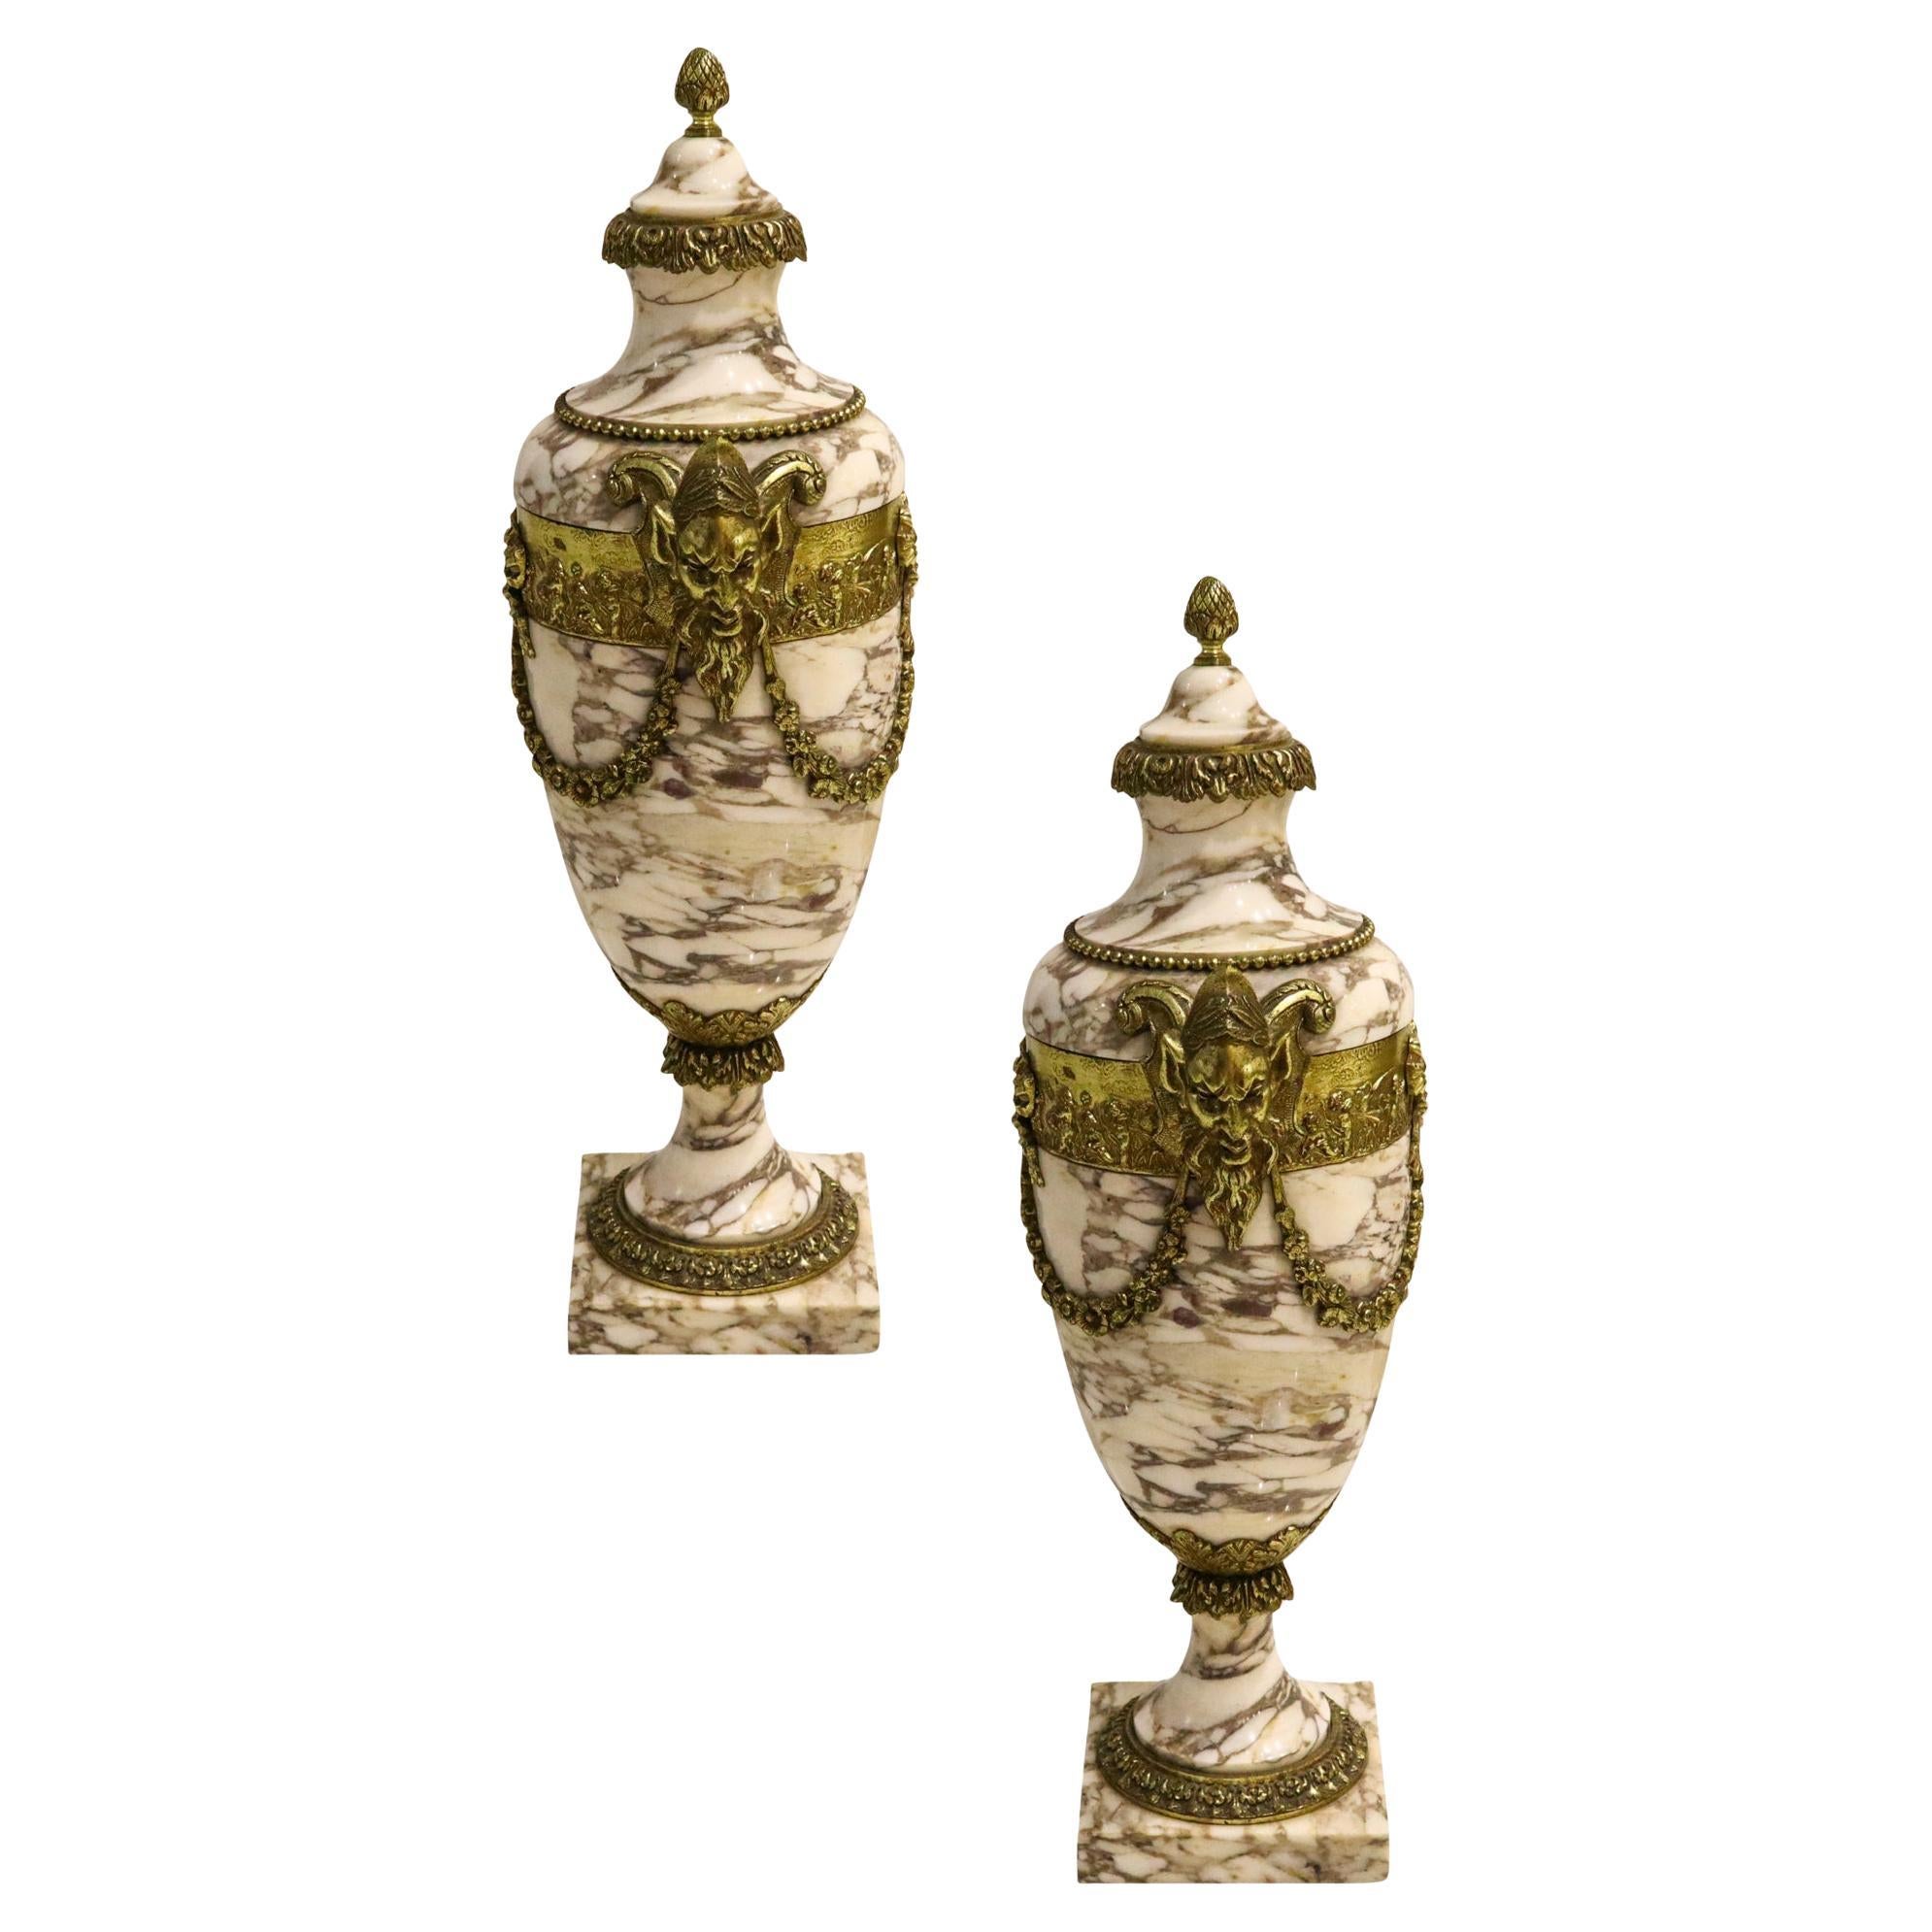 French 1870 Third Empire Napoleon III Pair of Urns in Marble with Gilded Ormolu For Sale